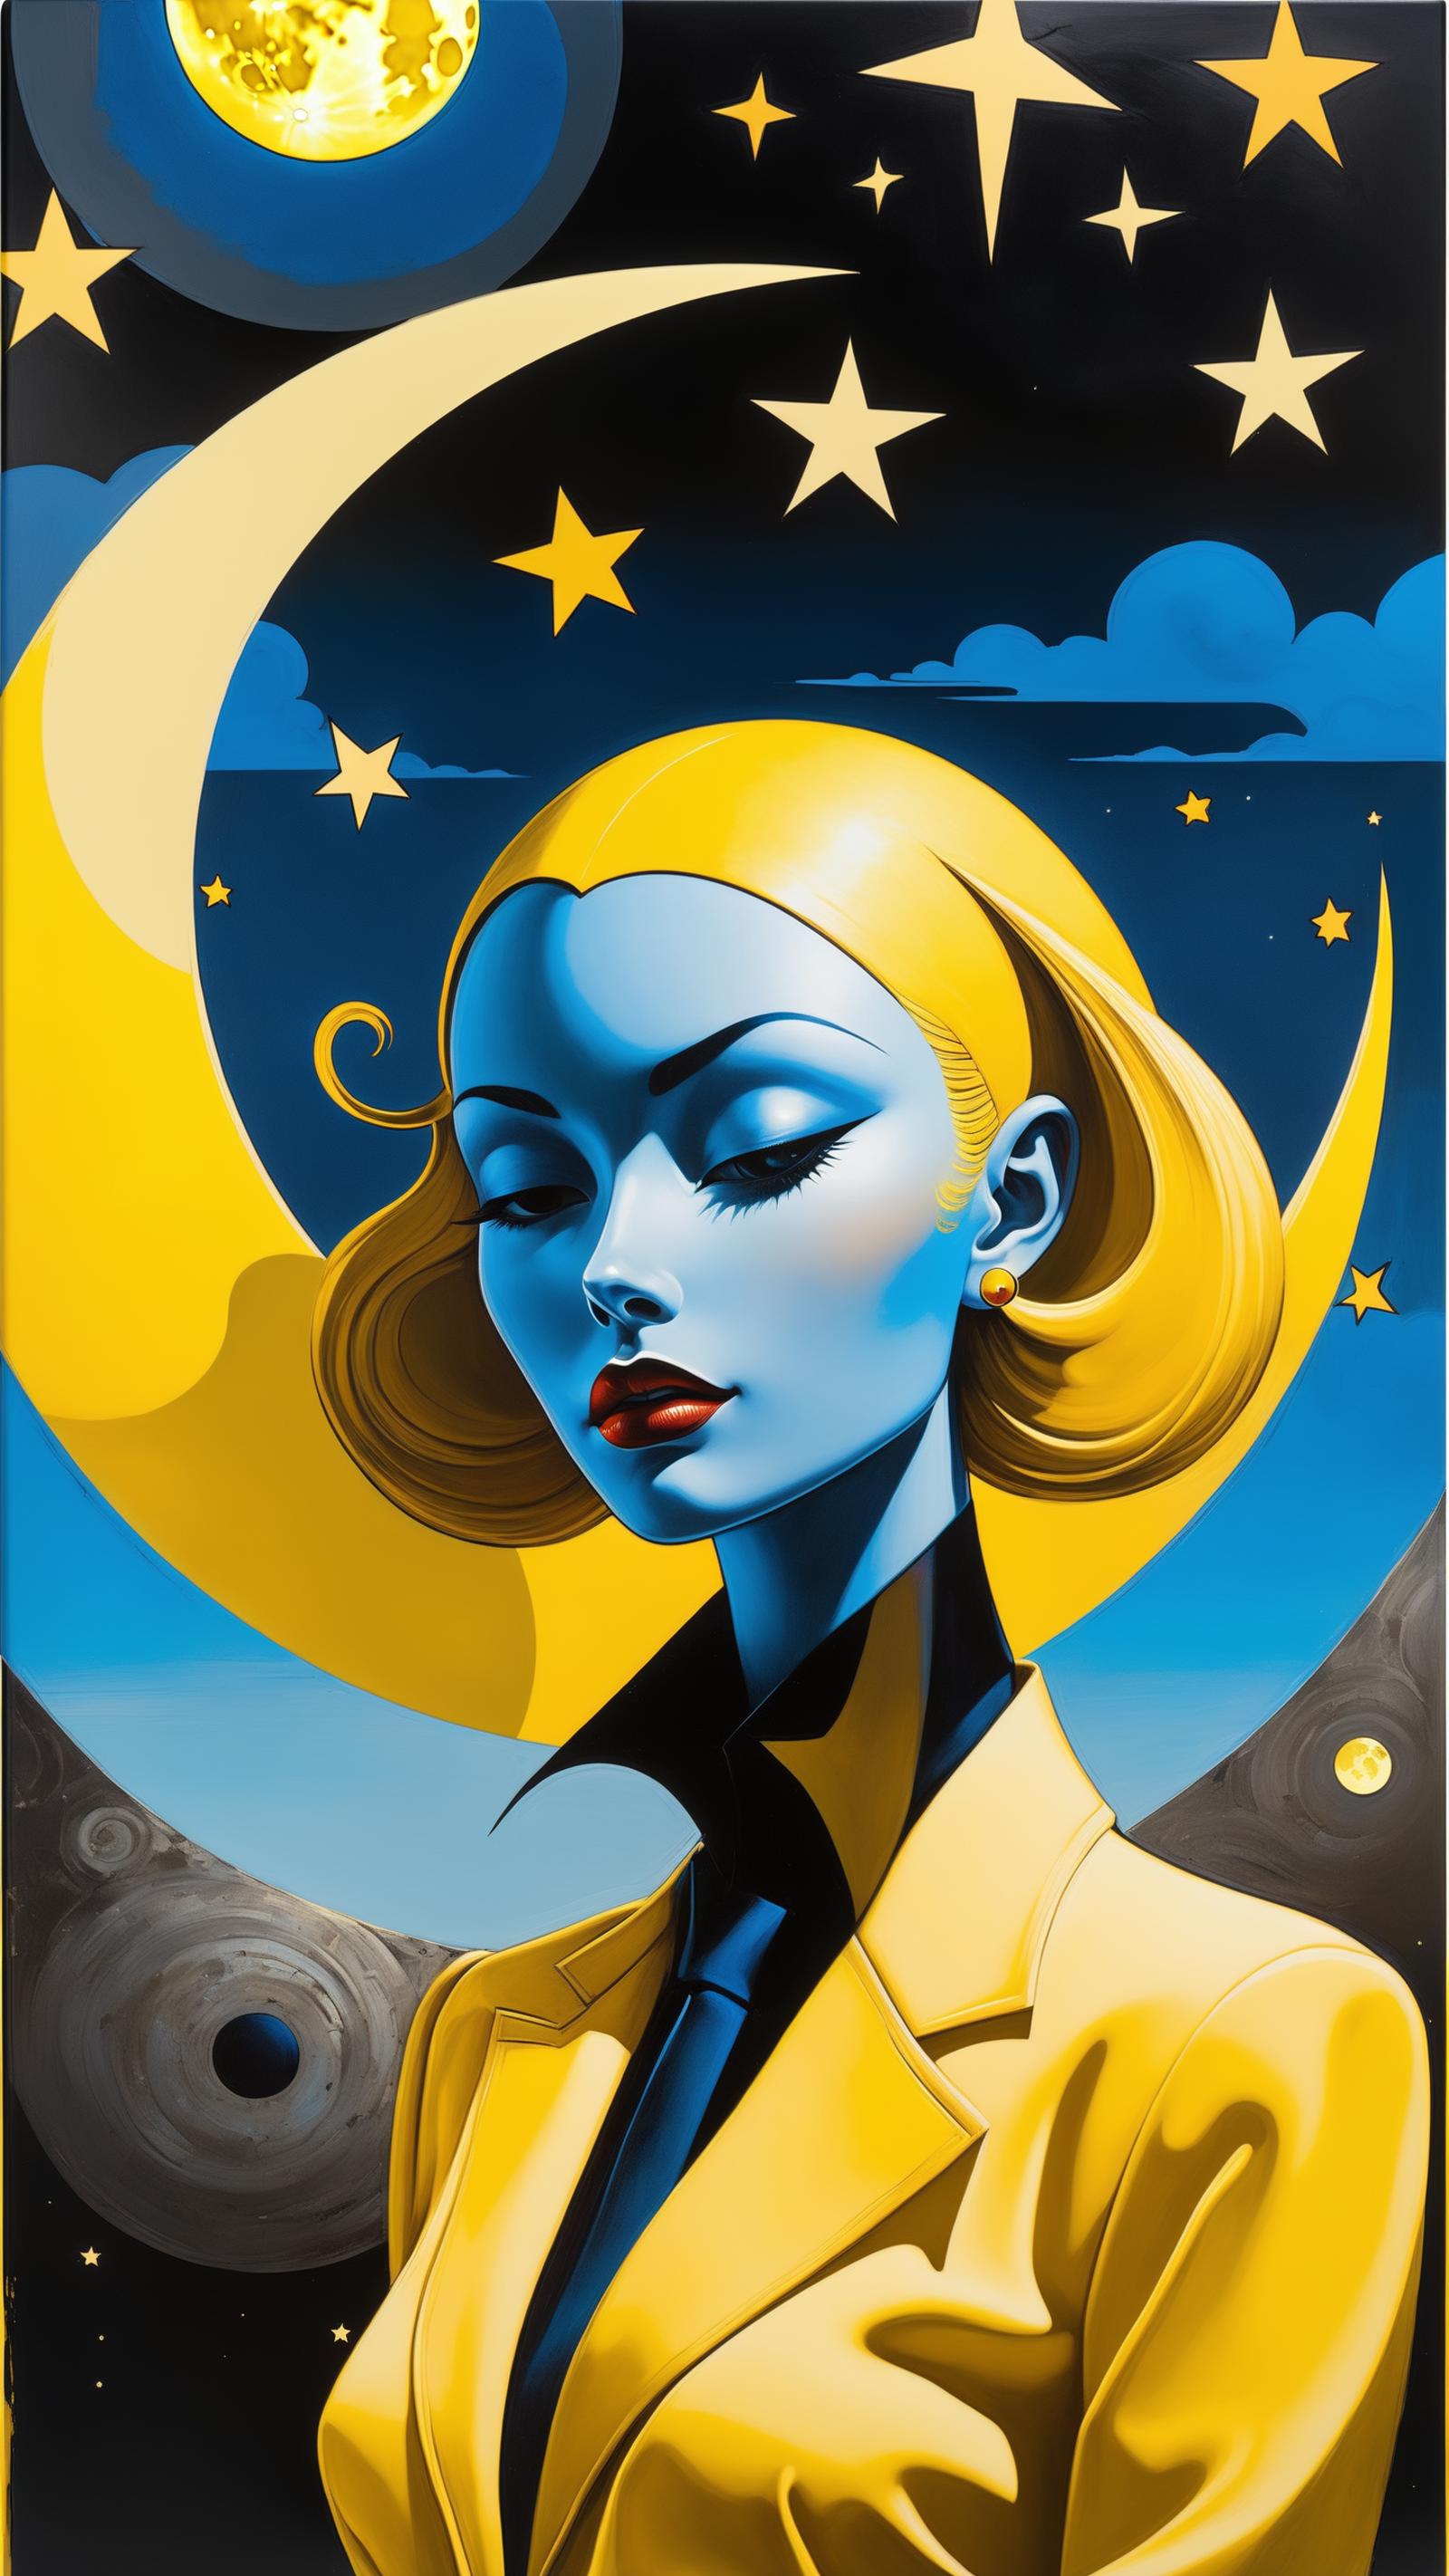 A yellow-haired woman with blue skin and red lips under a moon at night.